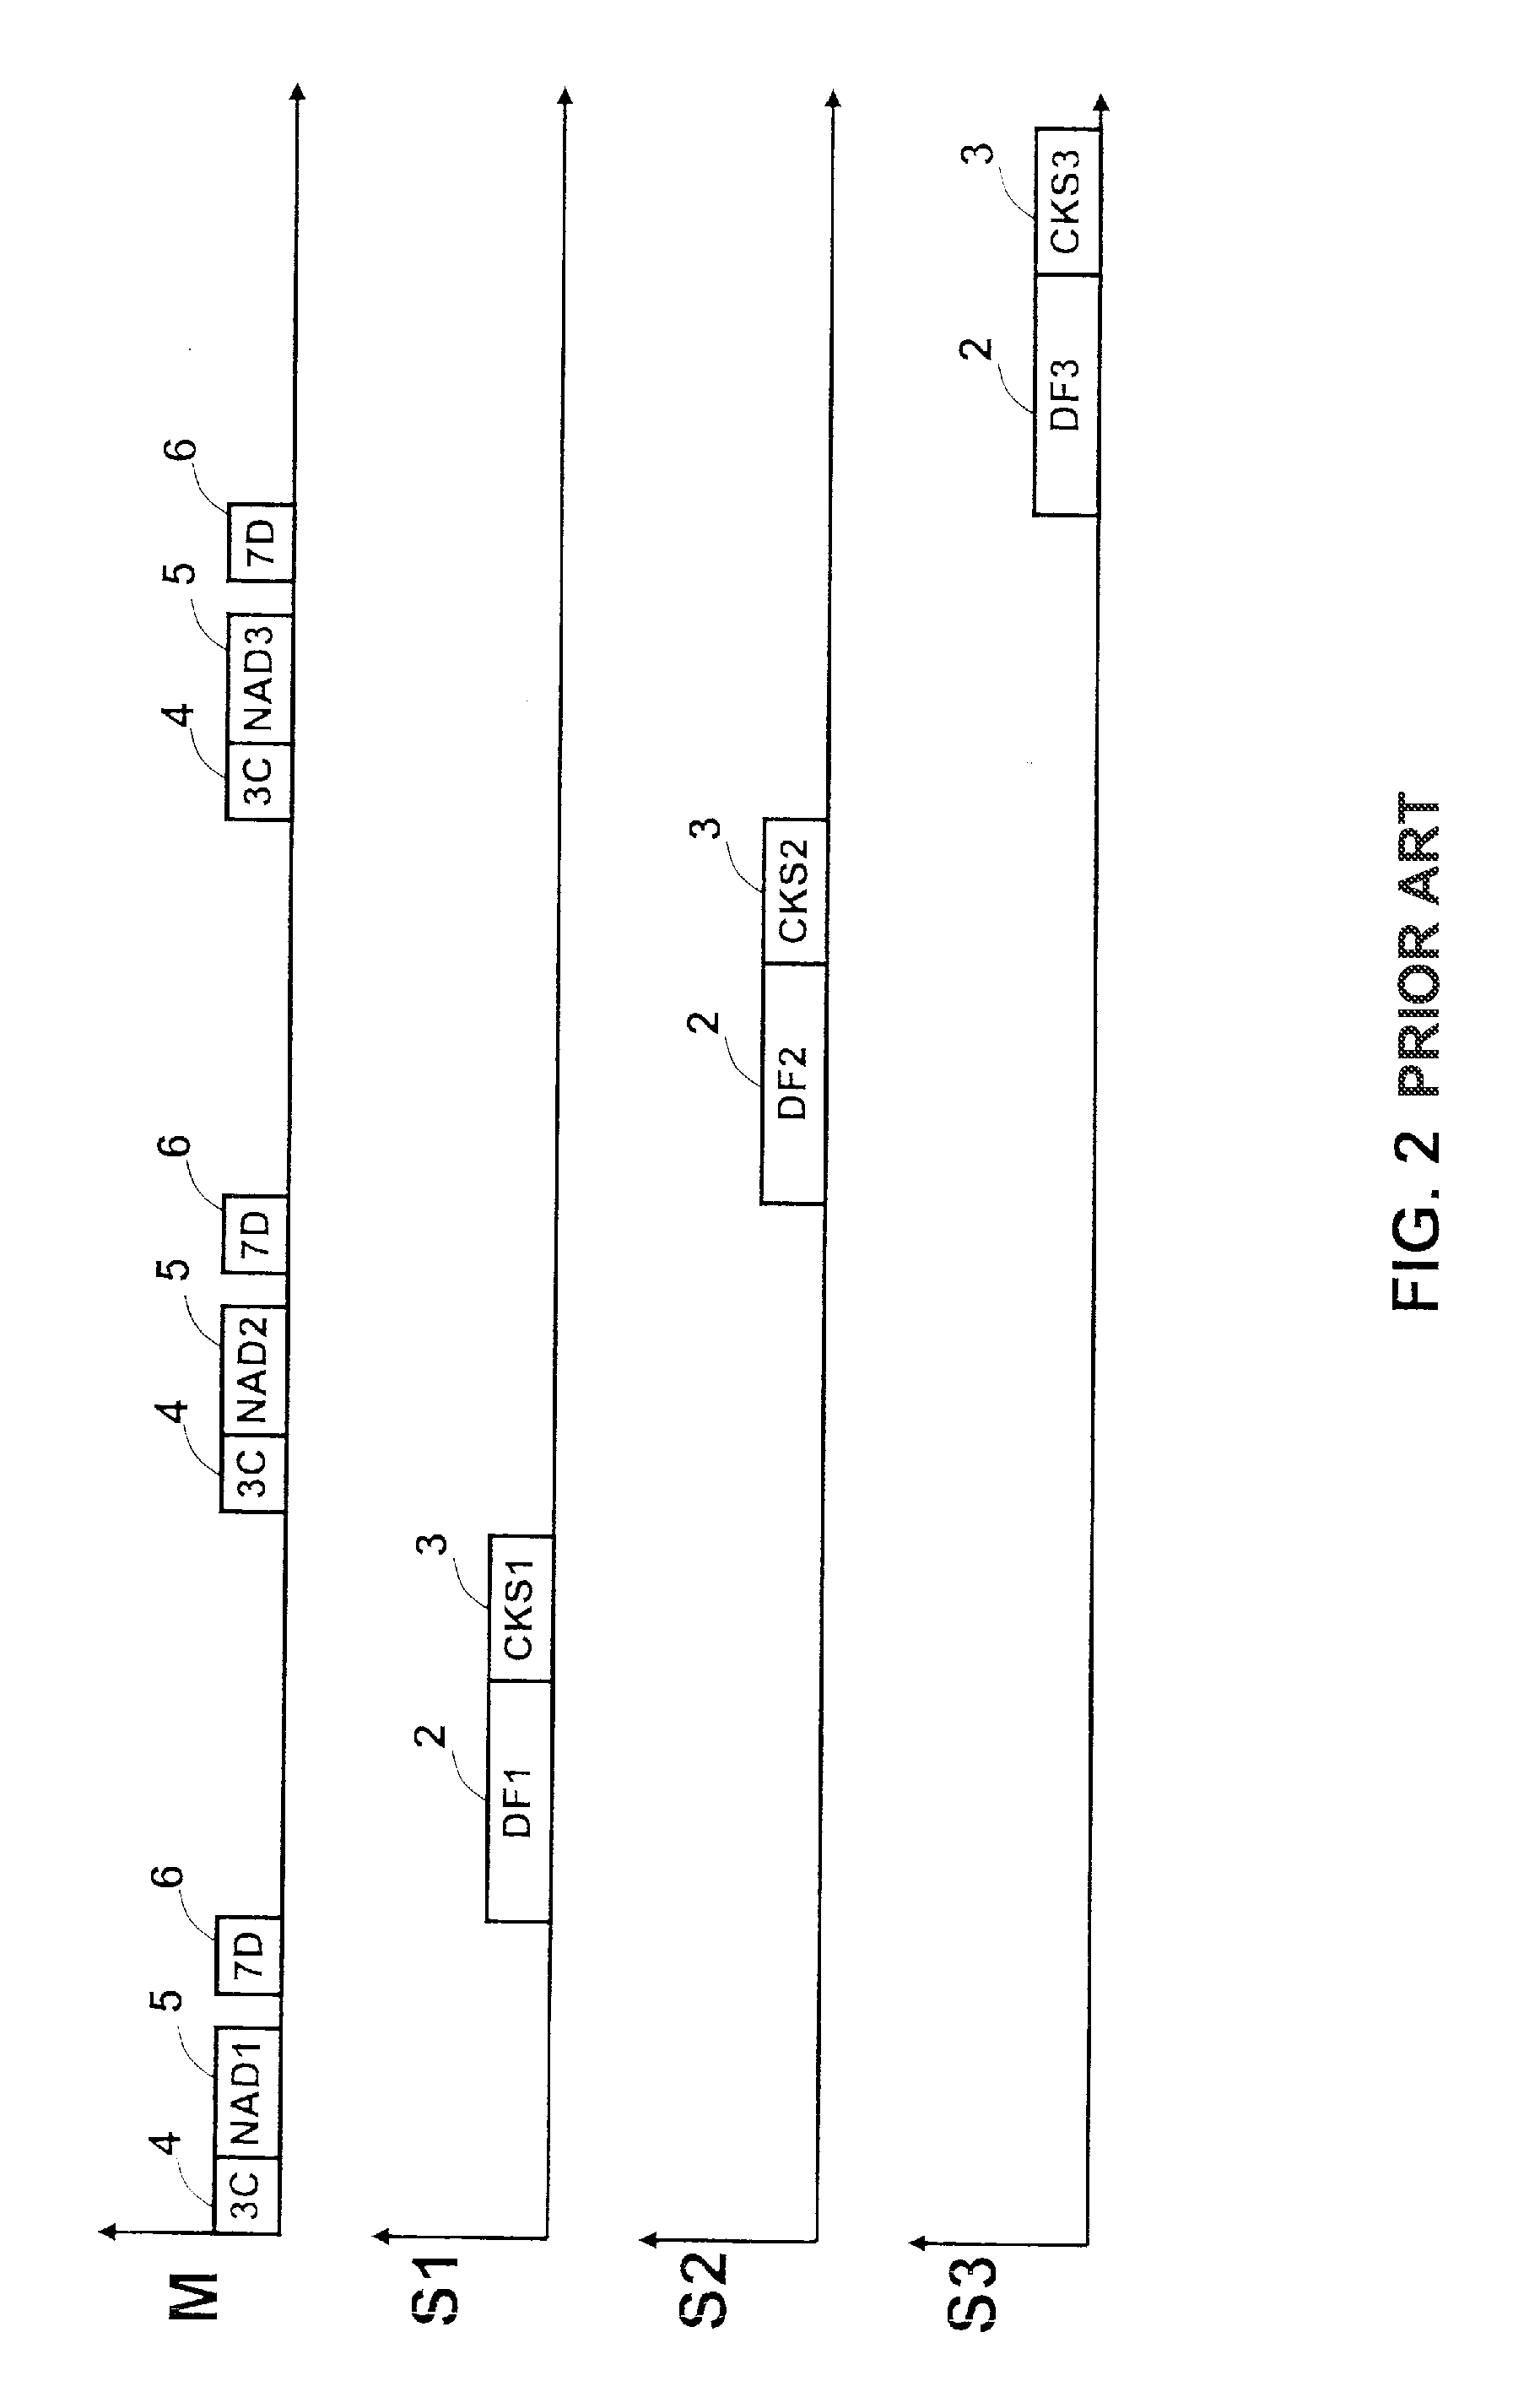 Communication method and device for a motor vehicle